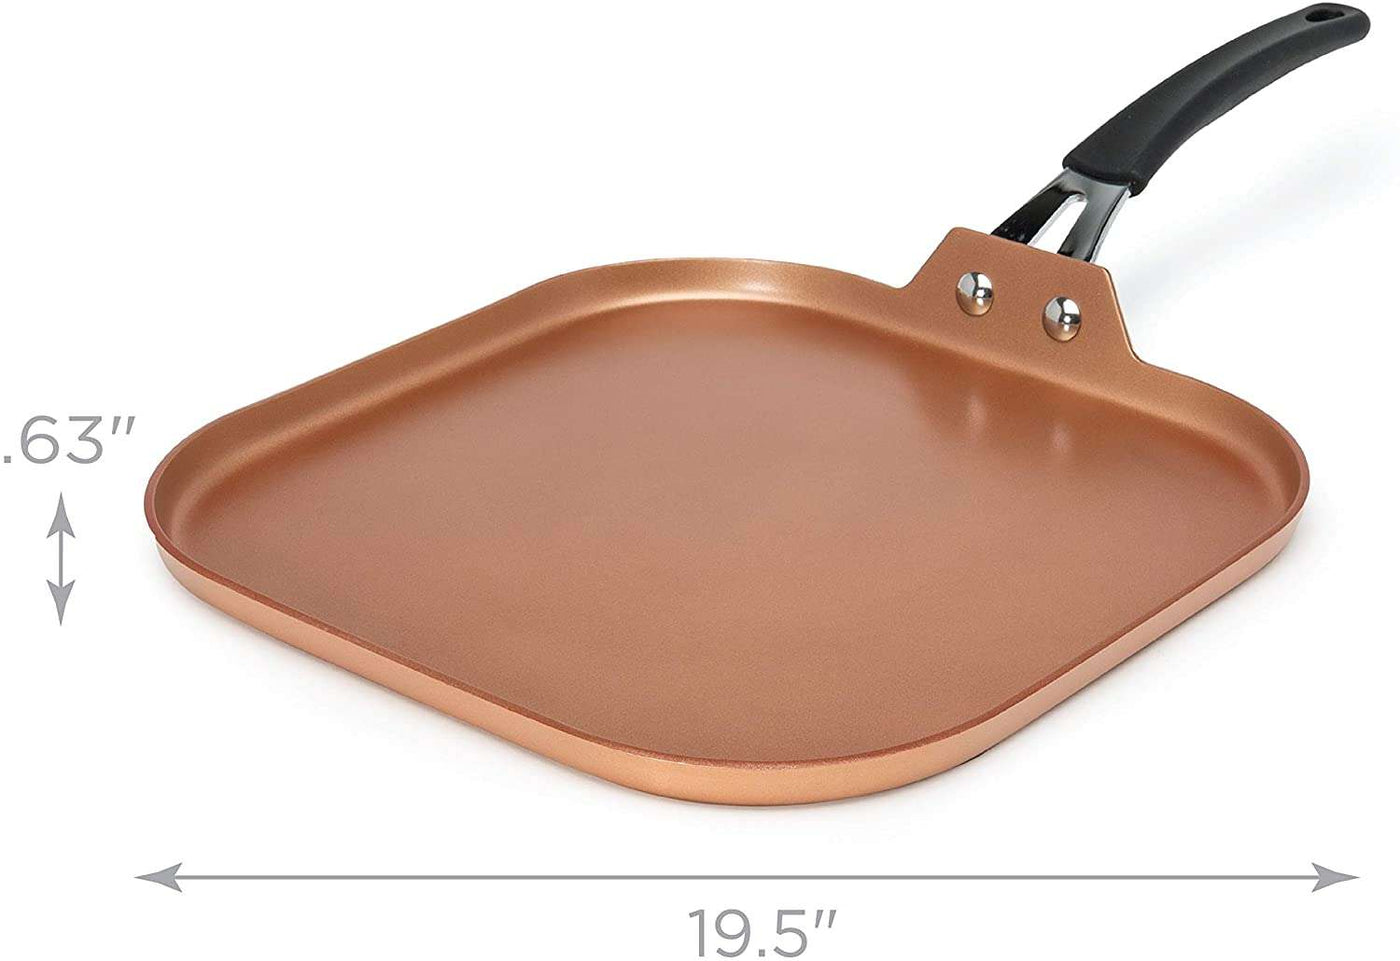 Impressions Non-Stick Griddle, 11 Inch - Ecolution – Ecolution Cookware